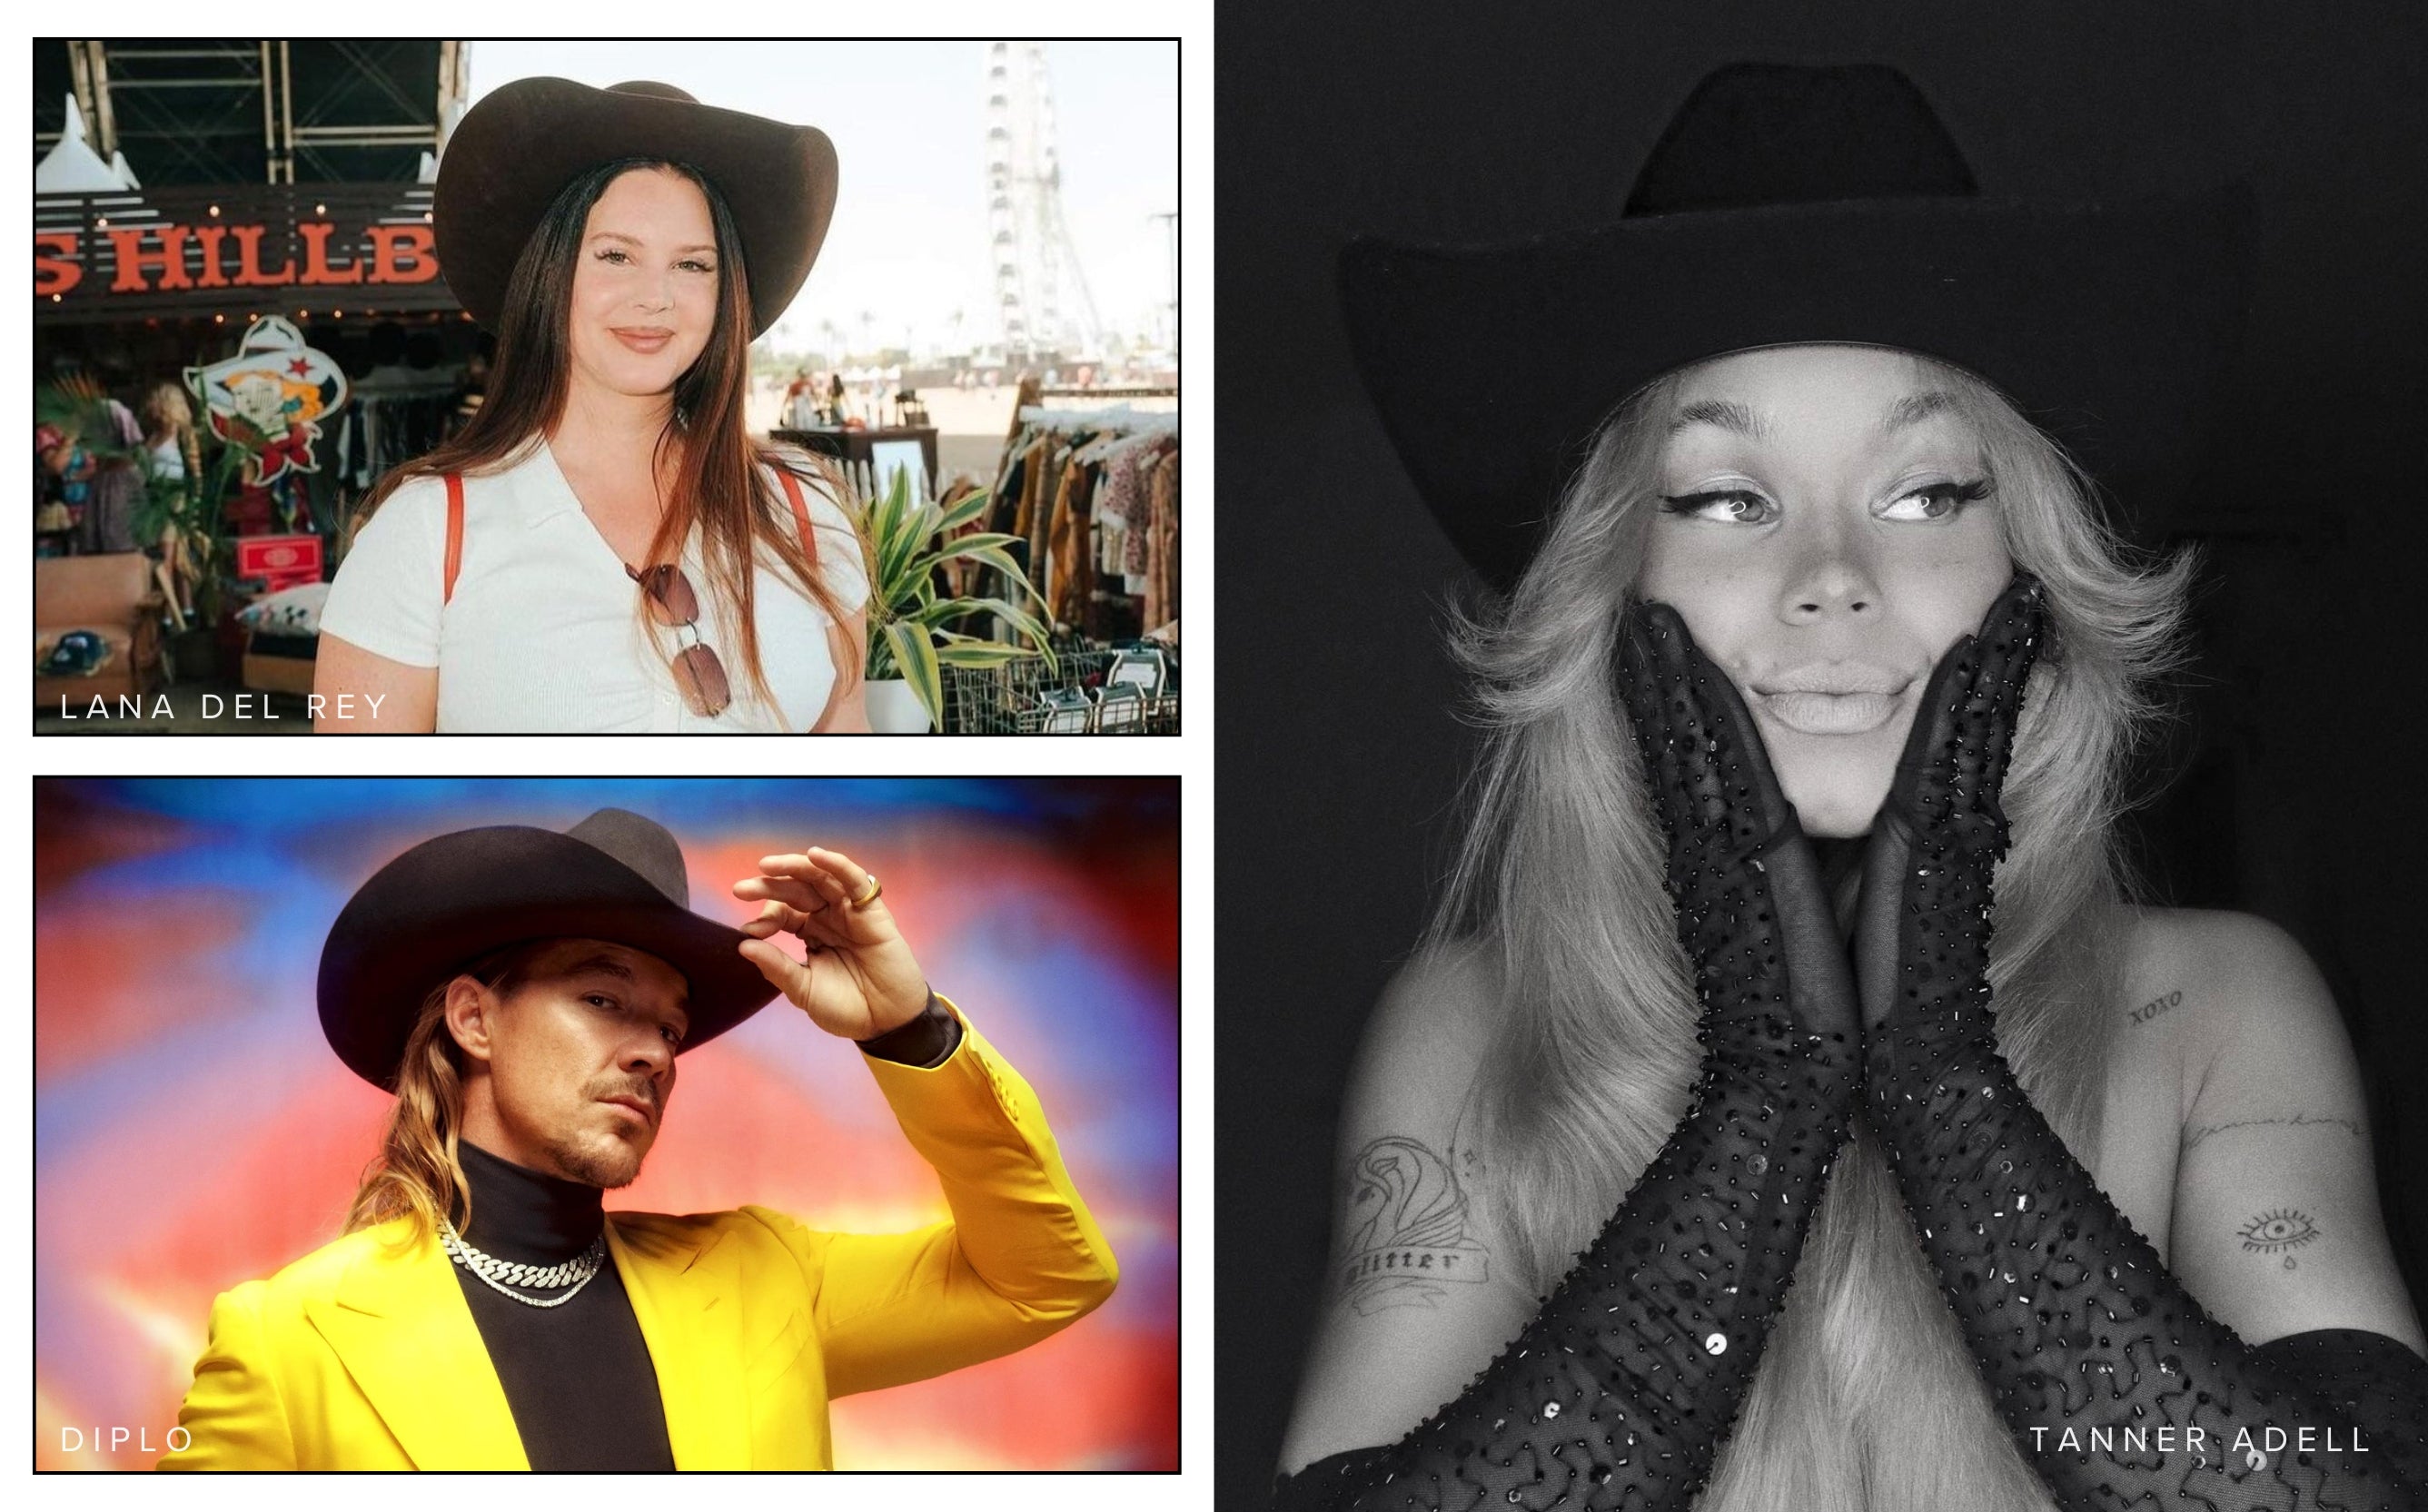 3 celebrities shown wearing cowgirl hats and cowboy hats for outfit inspiration